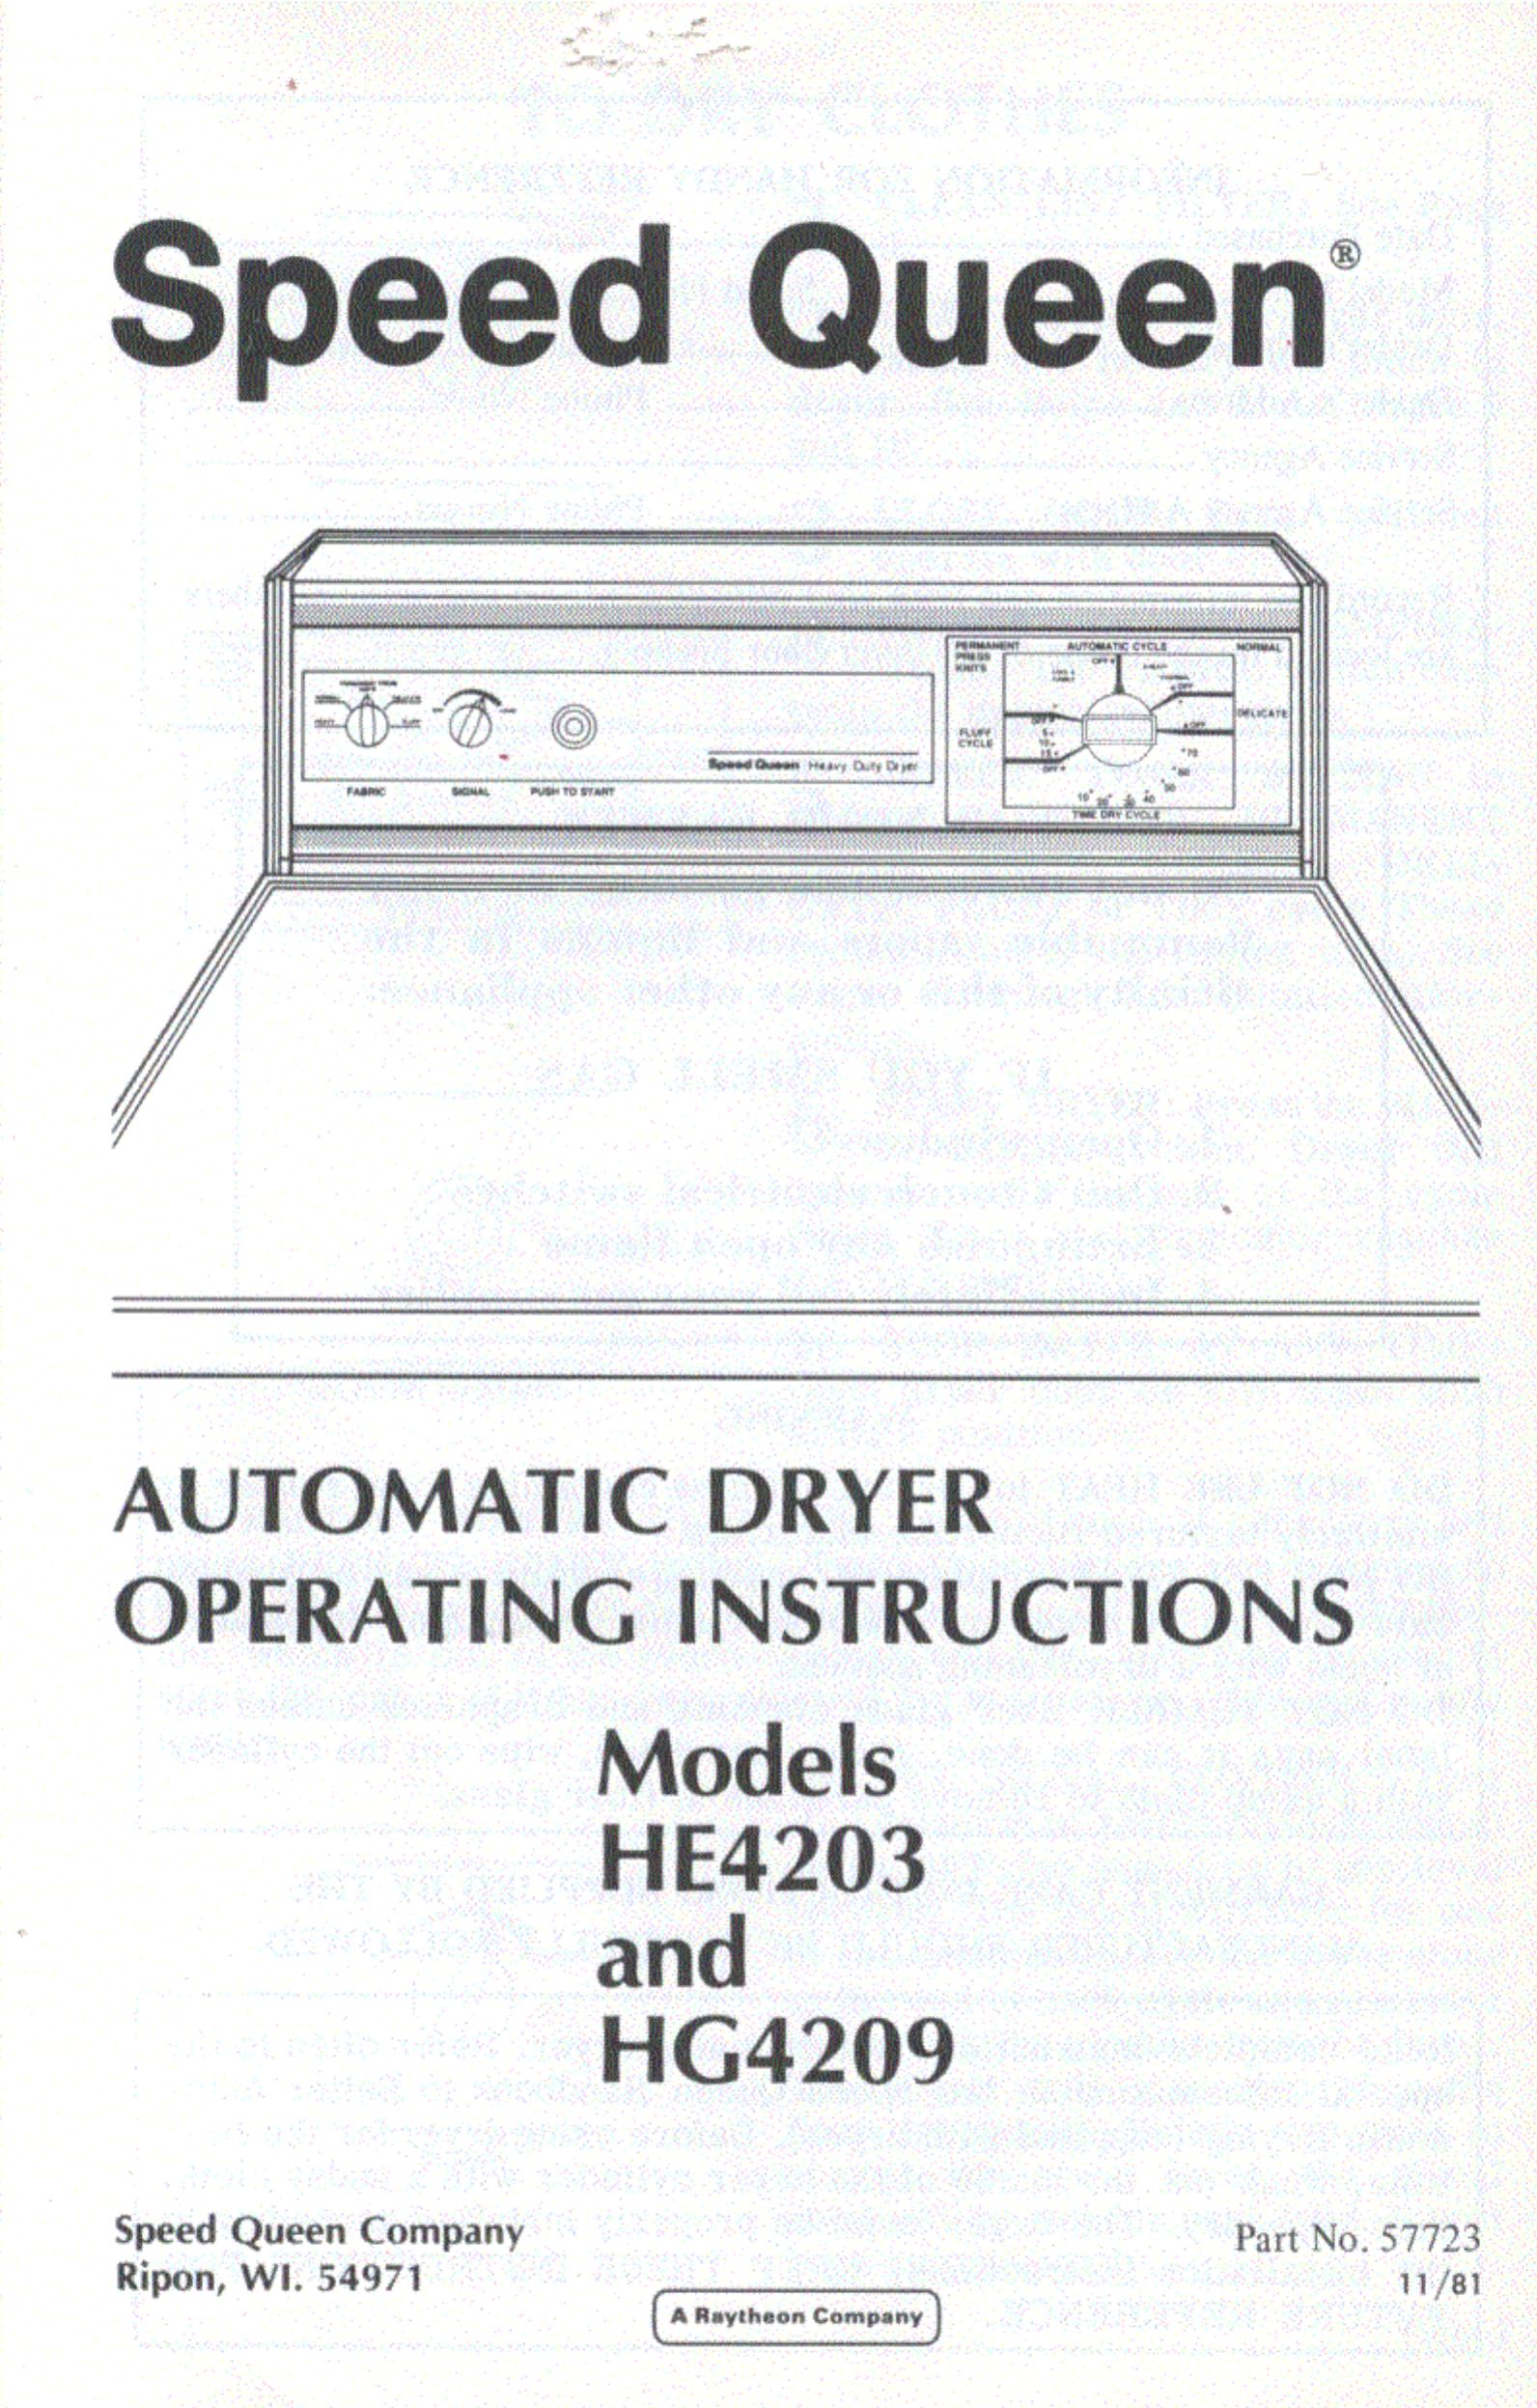 Speed Queen HG4209 Clothes Dryer User Manual